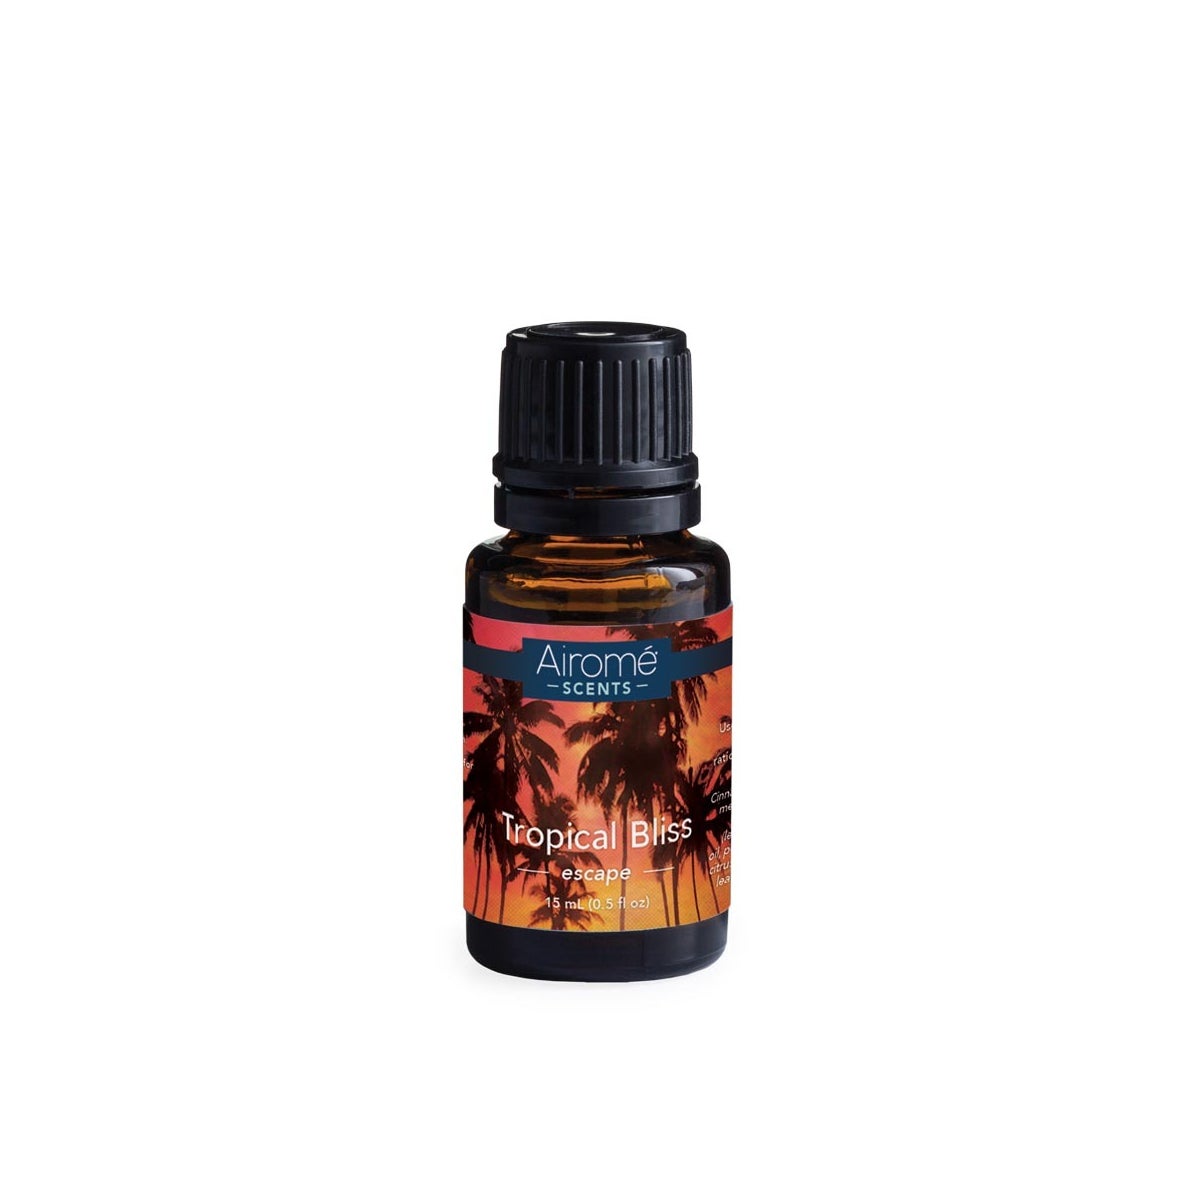 Airome Scents Essential Oil Blend 15 ml - Tropical Bliss